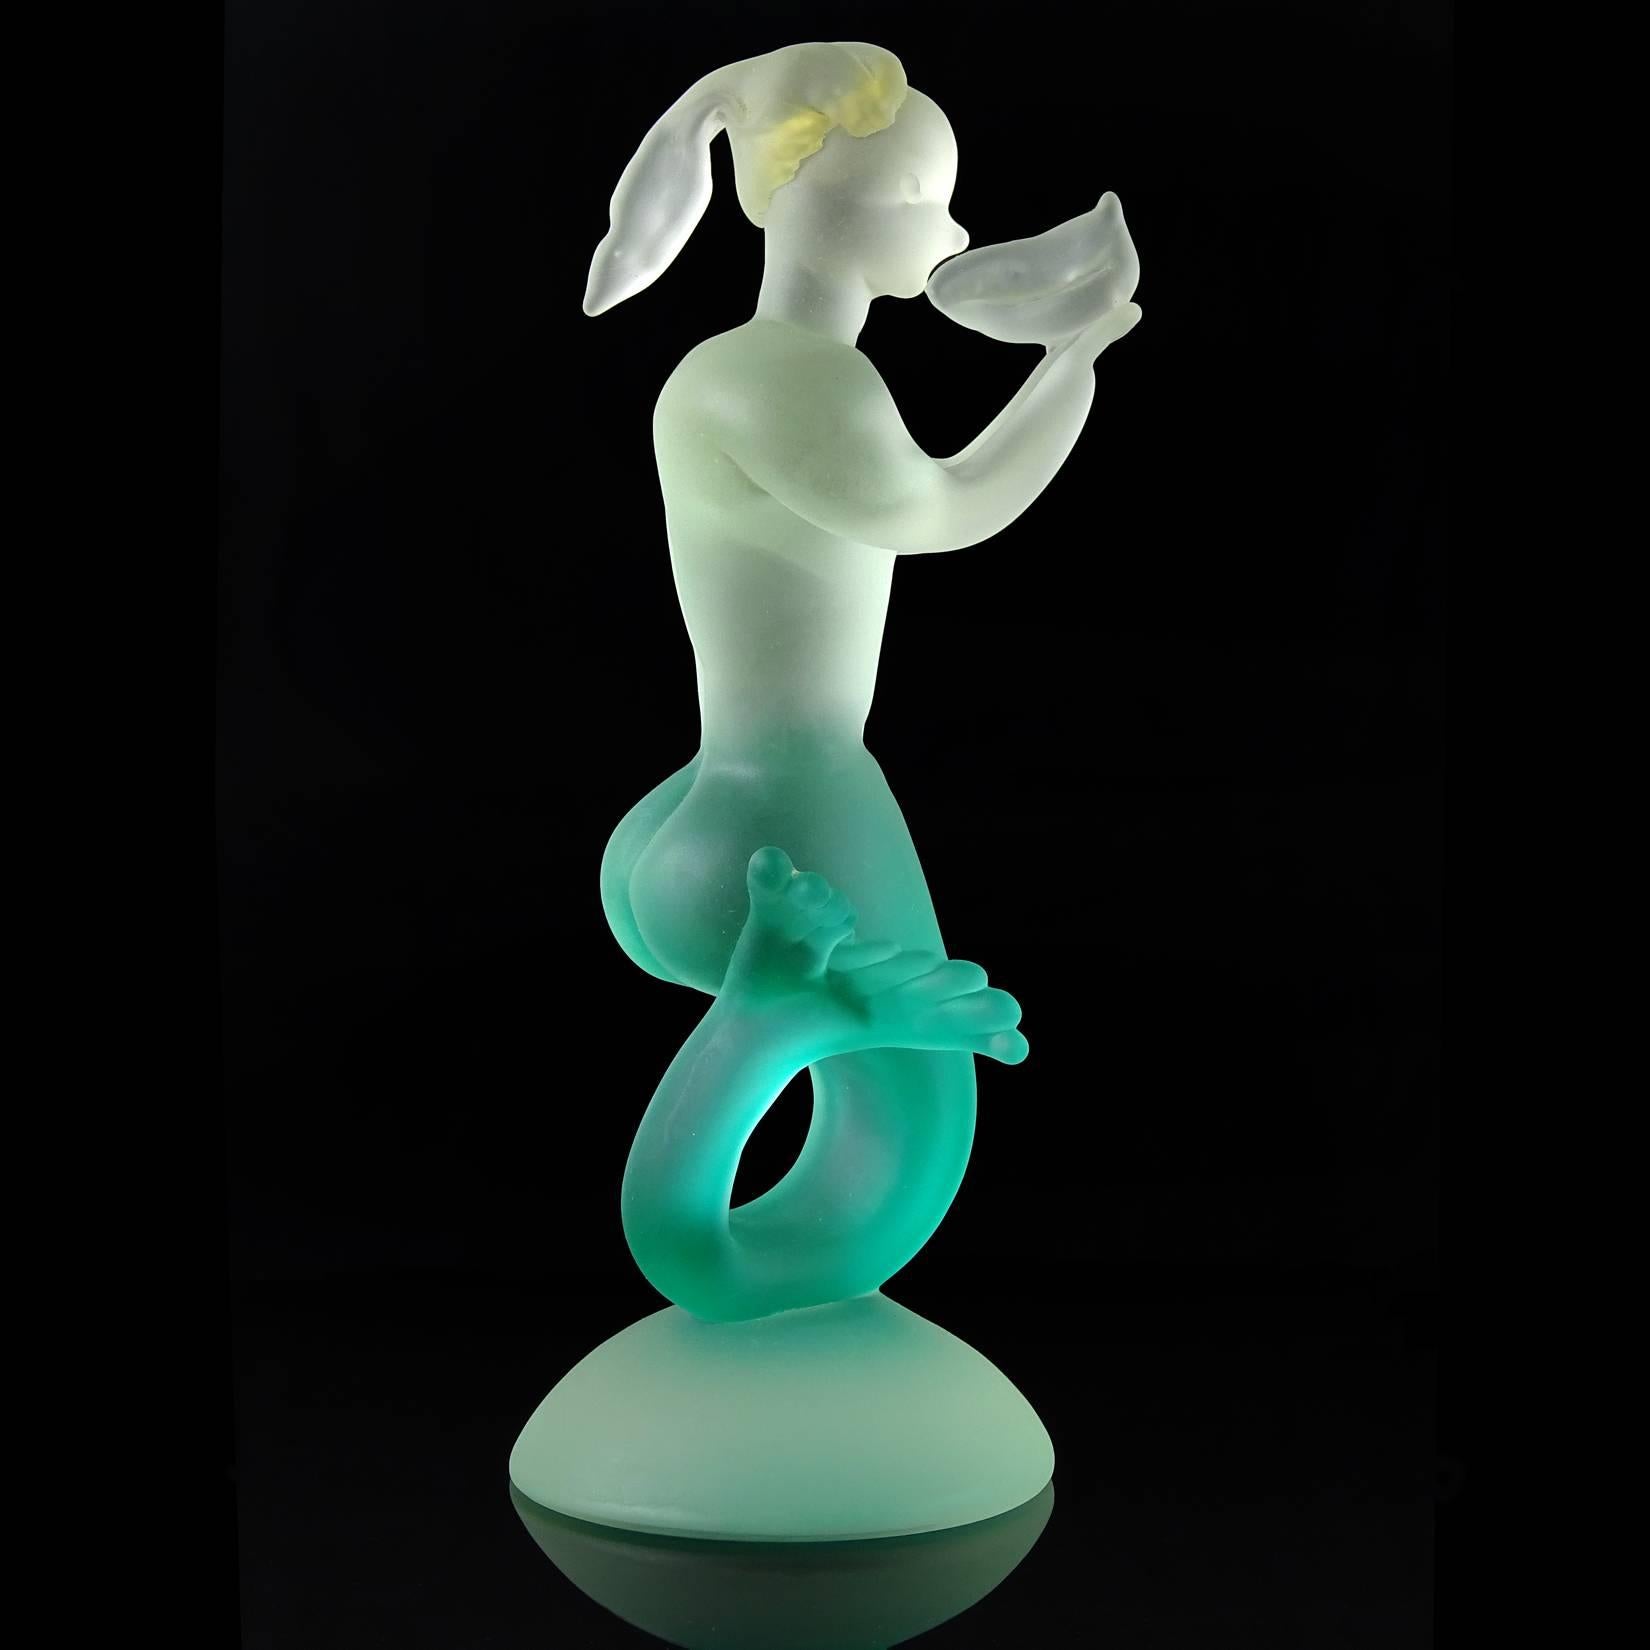 Rare Murano hand blown sommerso green to clear Italian art glass mermaid sculpture. Attributed to the Seguso Vetri d'Arte company. The piece has gold flecks inside her hair and an unusual mark on her chest, that looks like the number 1401 (see last